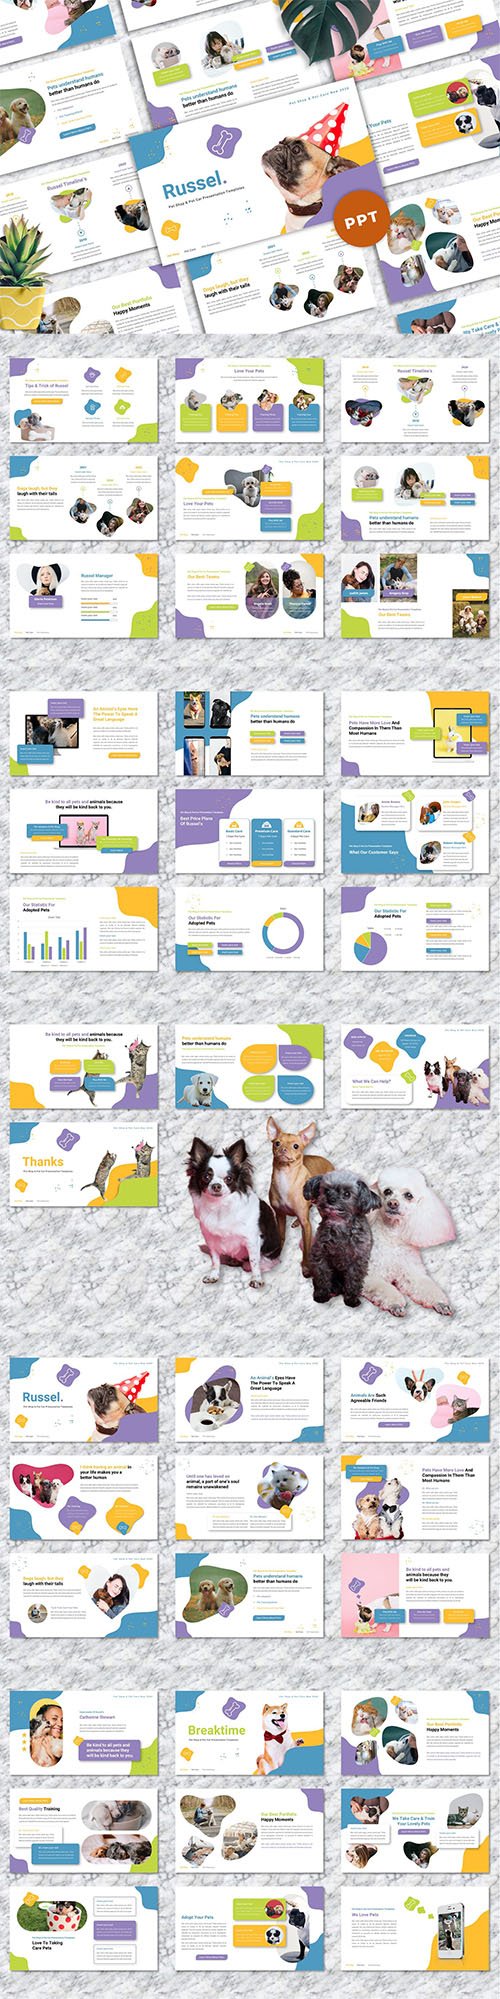 Russel - Pet Care Powerpoint Templates